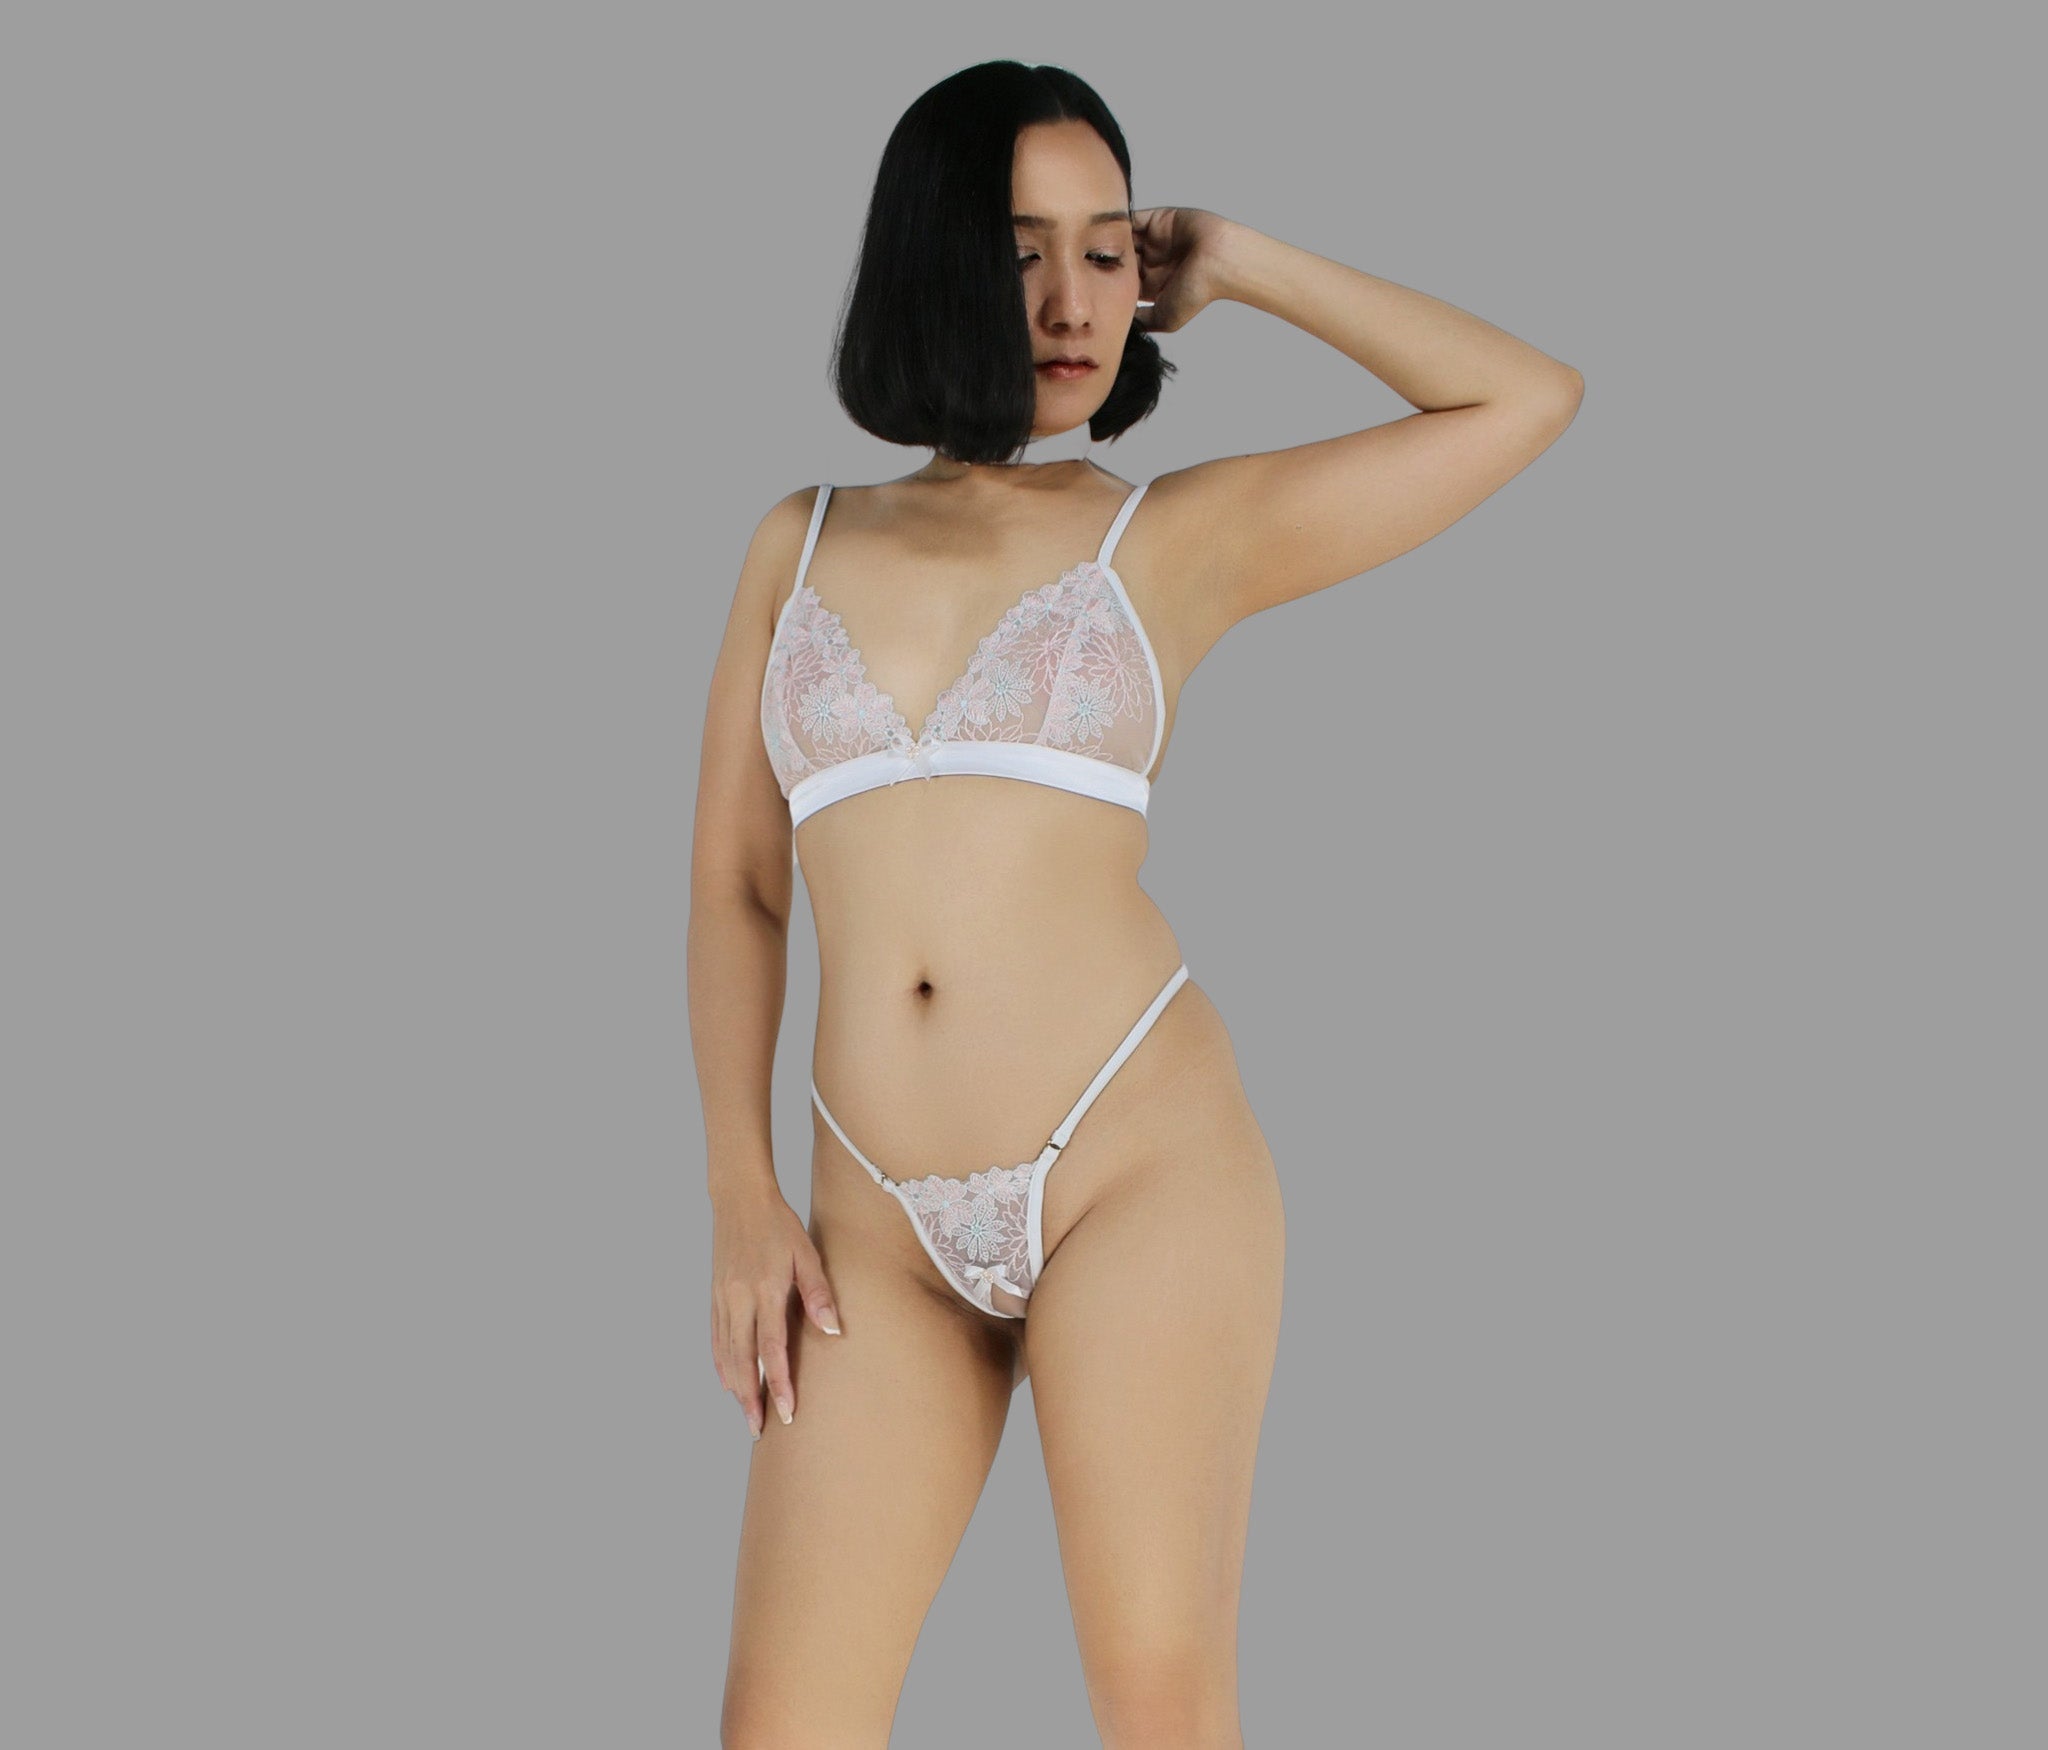 Crotchless transparent lingerie set, G string panties bralette and choker in see through pink flowered lace sexy sheer lingerie - Ange Déchu